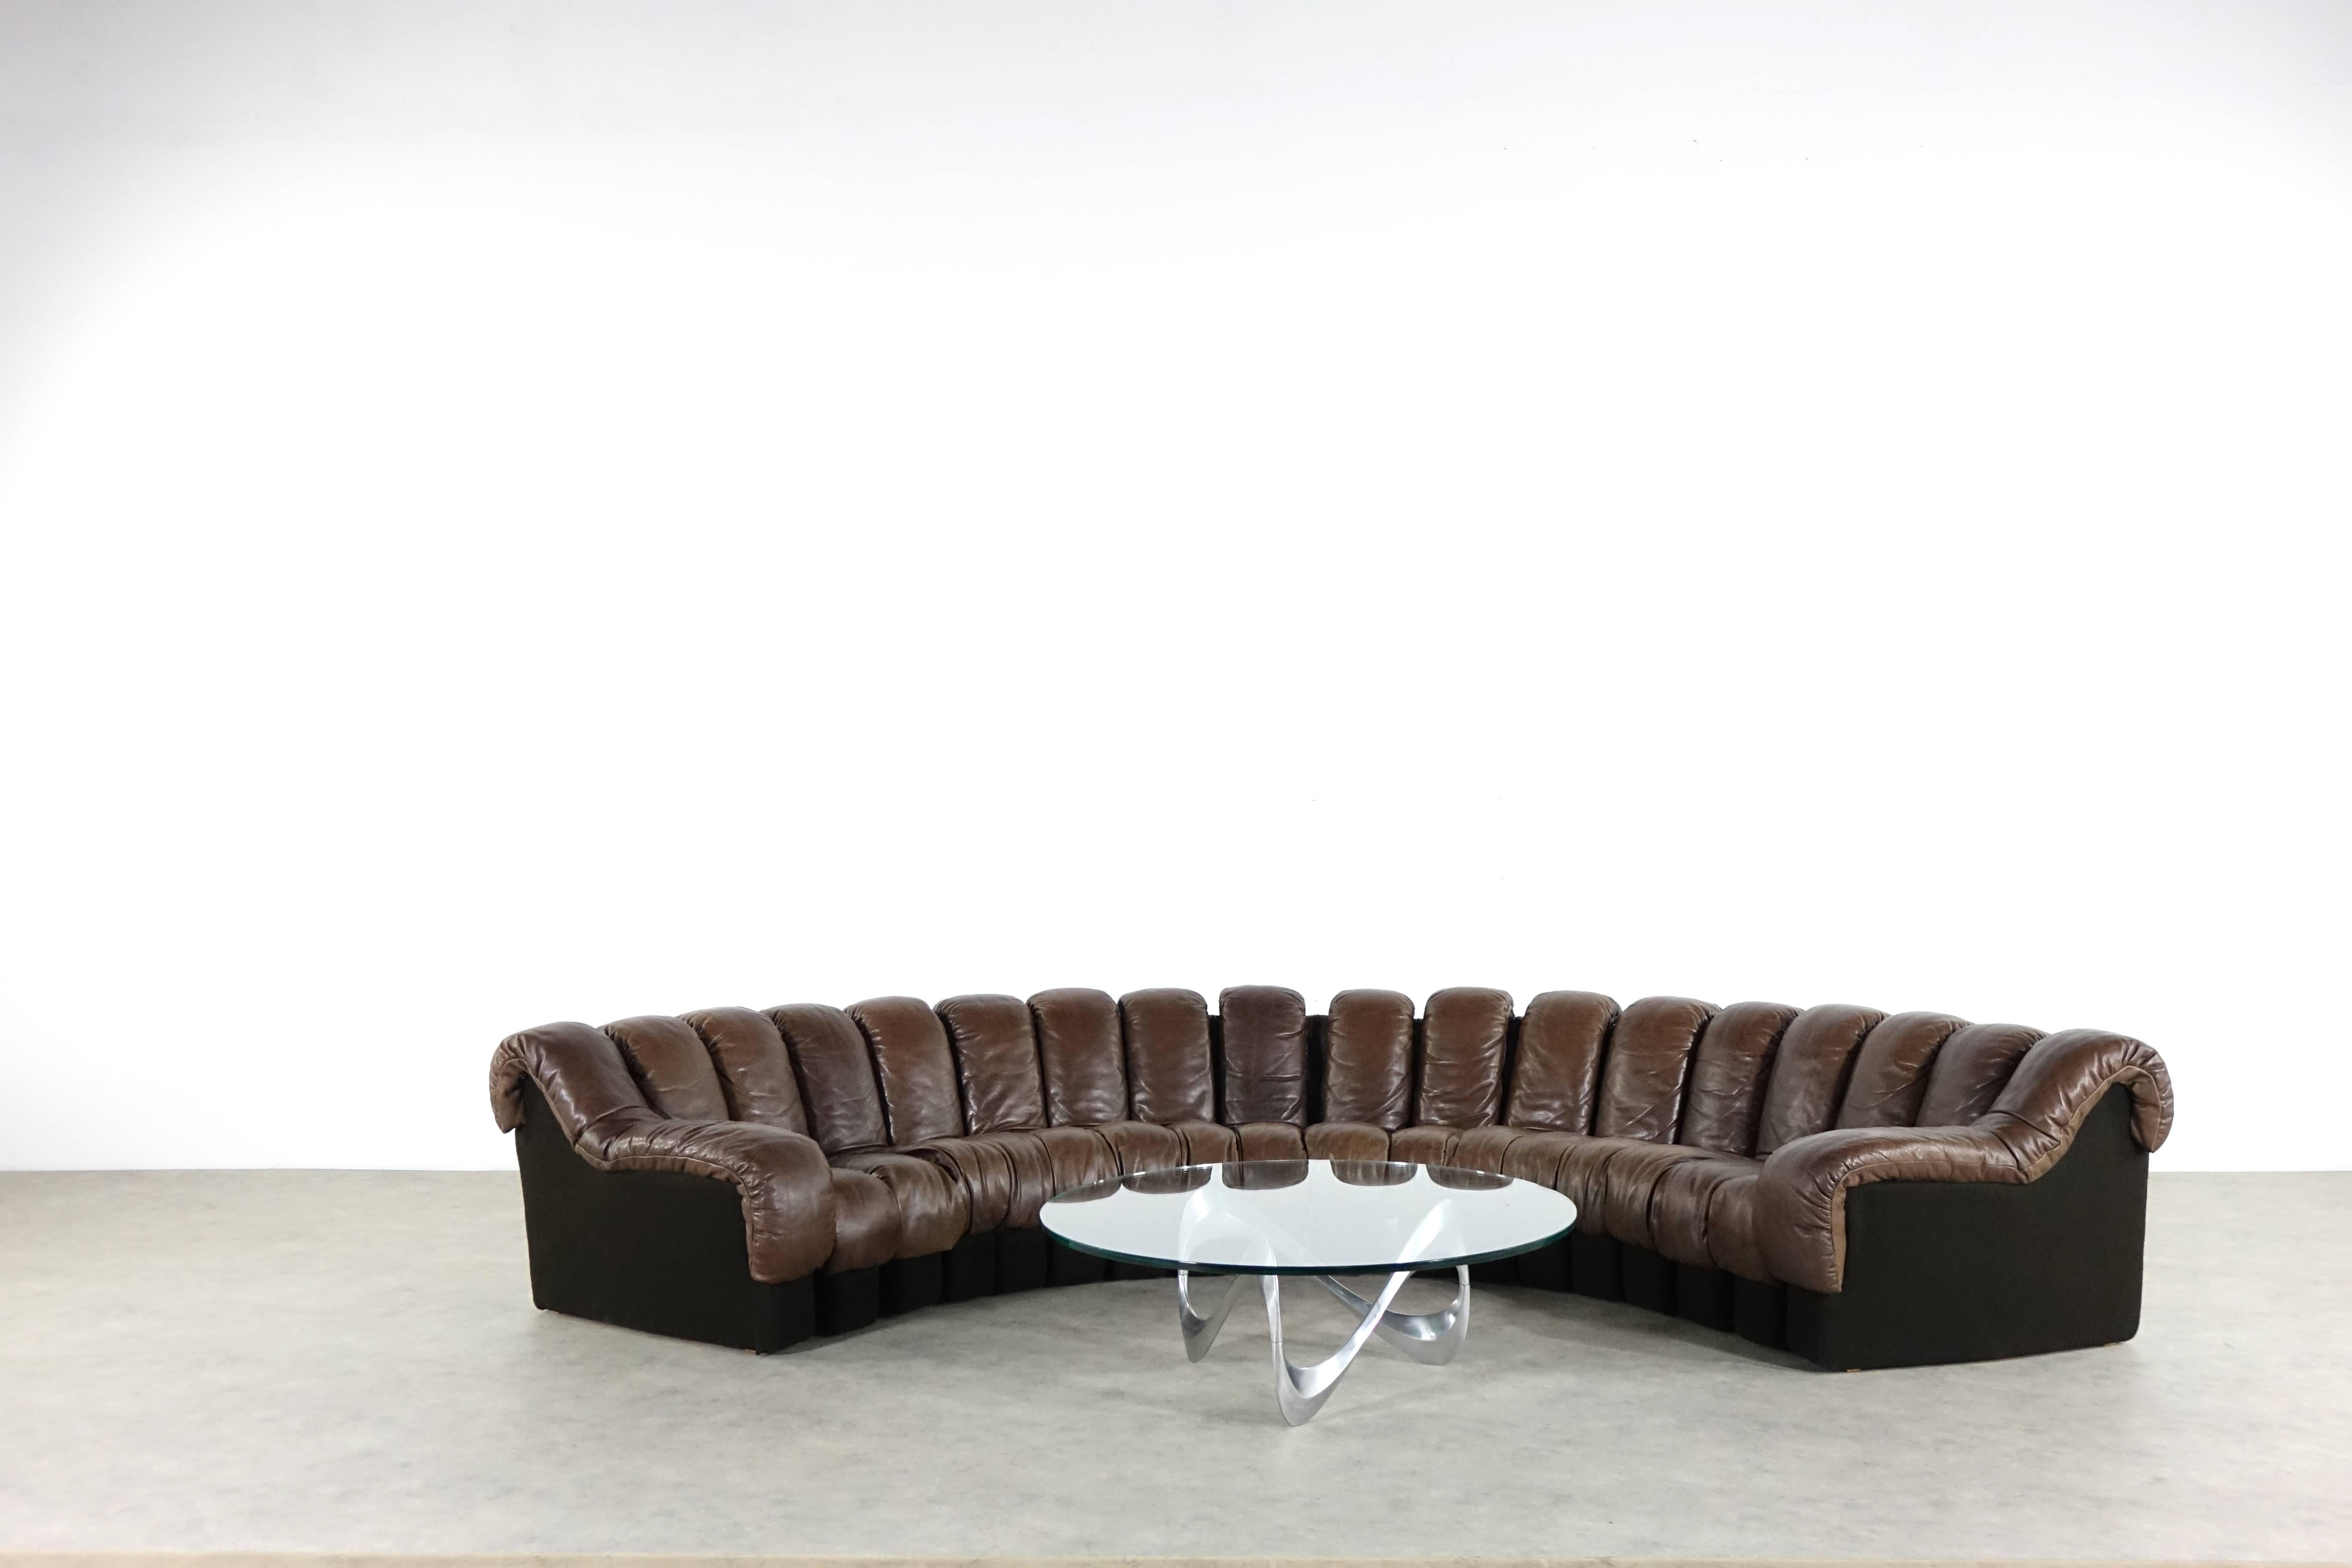 Late 20th Century De Sede DS 600 Sofa by Ueli Berger and Riva 1972, Chocolate Leather 18 Elements